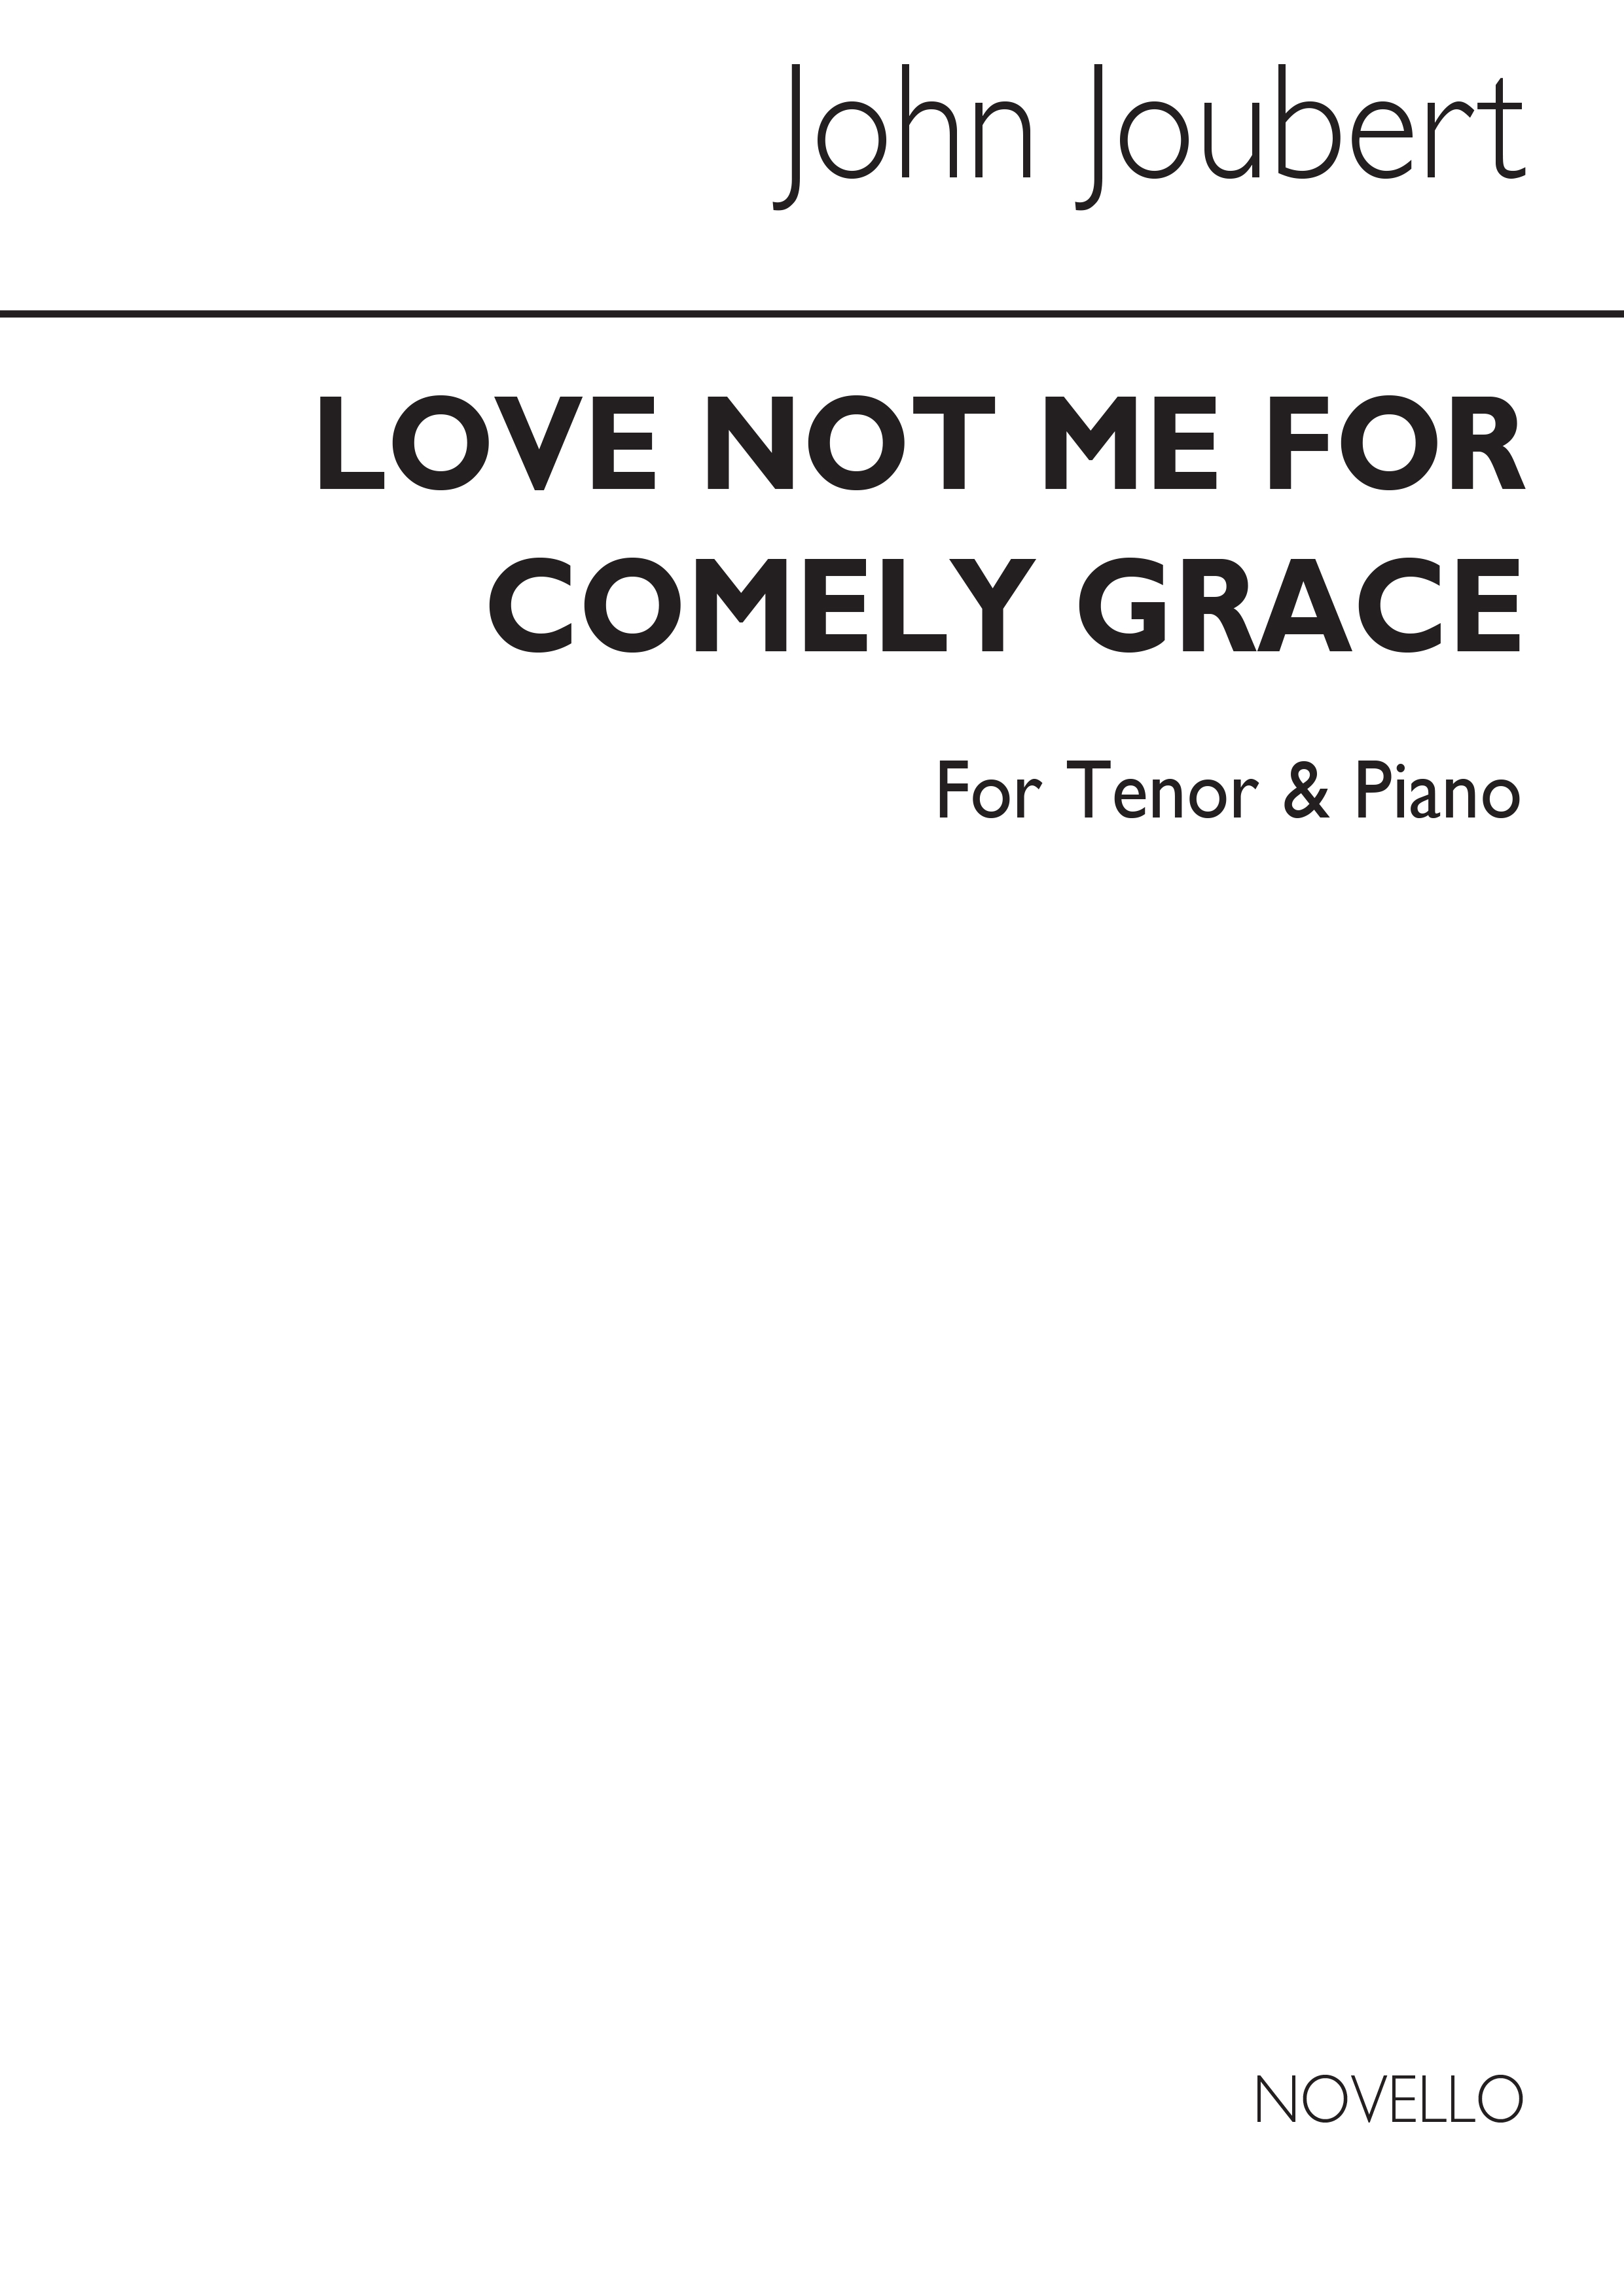 Joubert: Love Me Not For Comely Grace for Solo Ten and Piano acc.